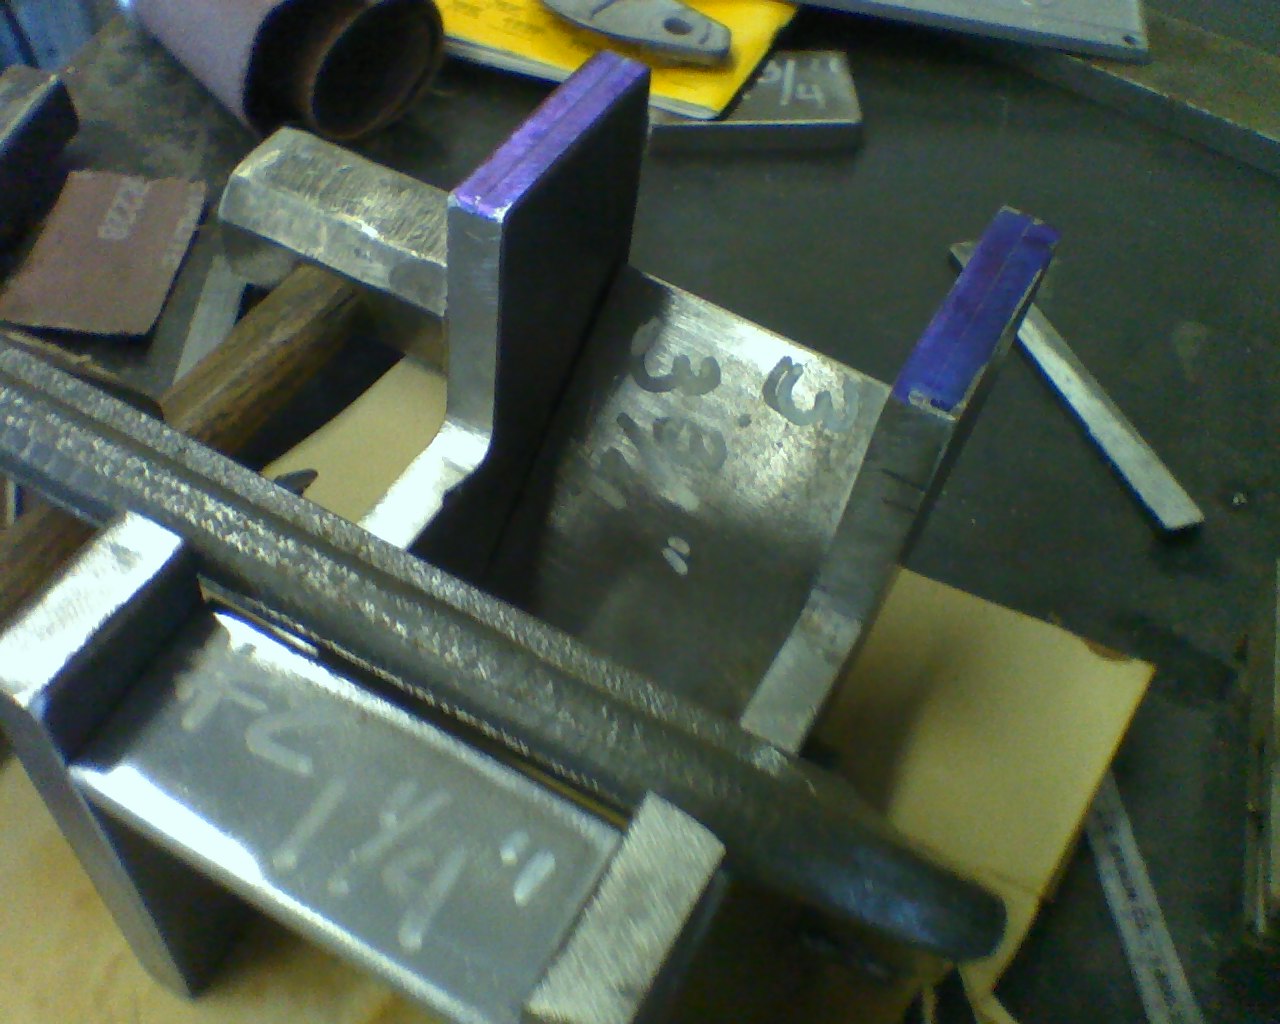 fabricated my first smithing magician